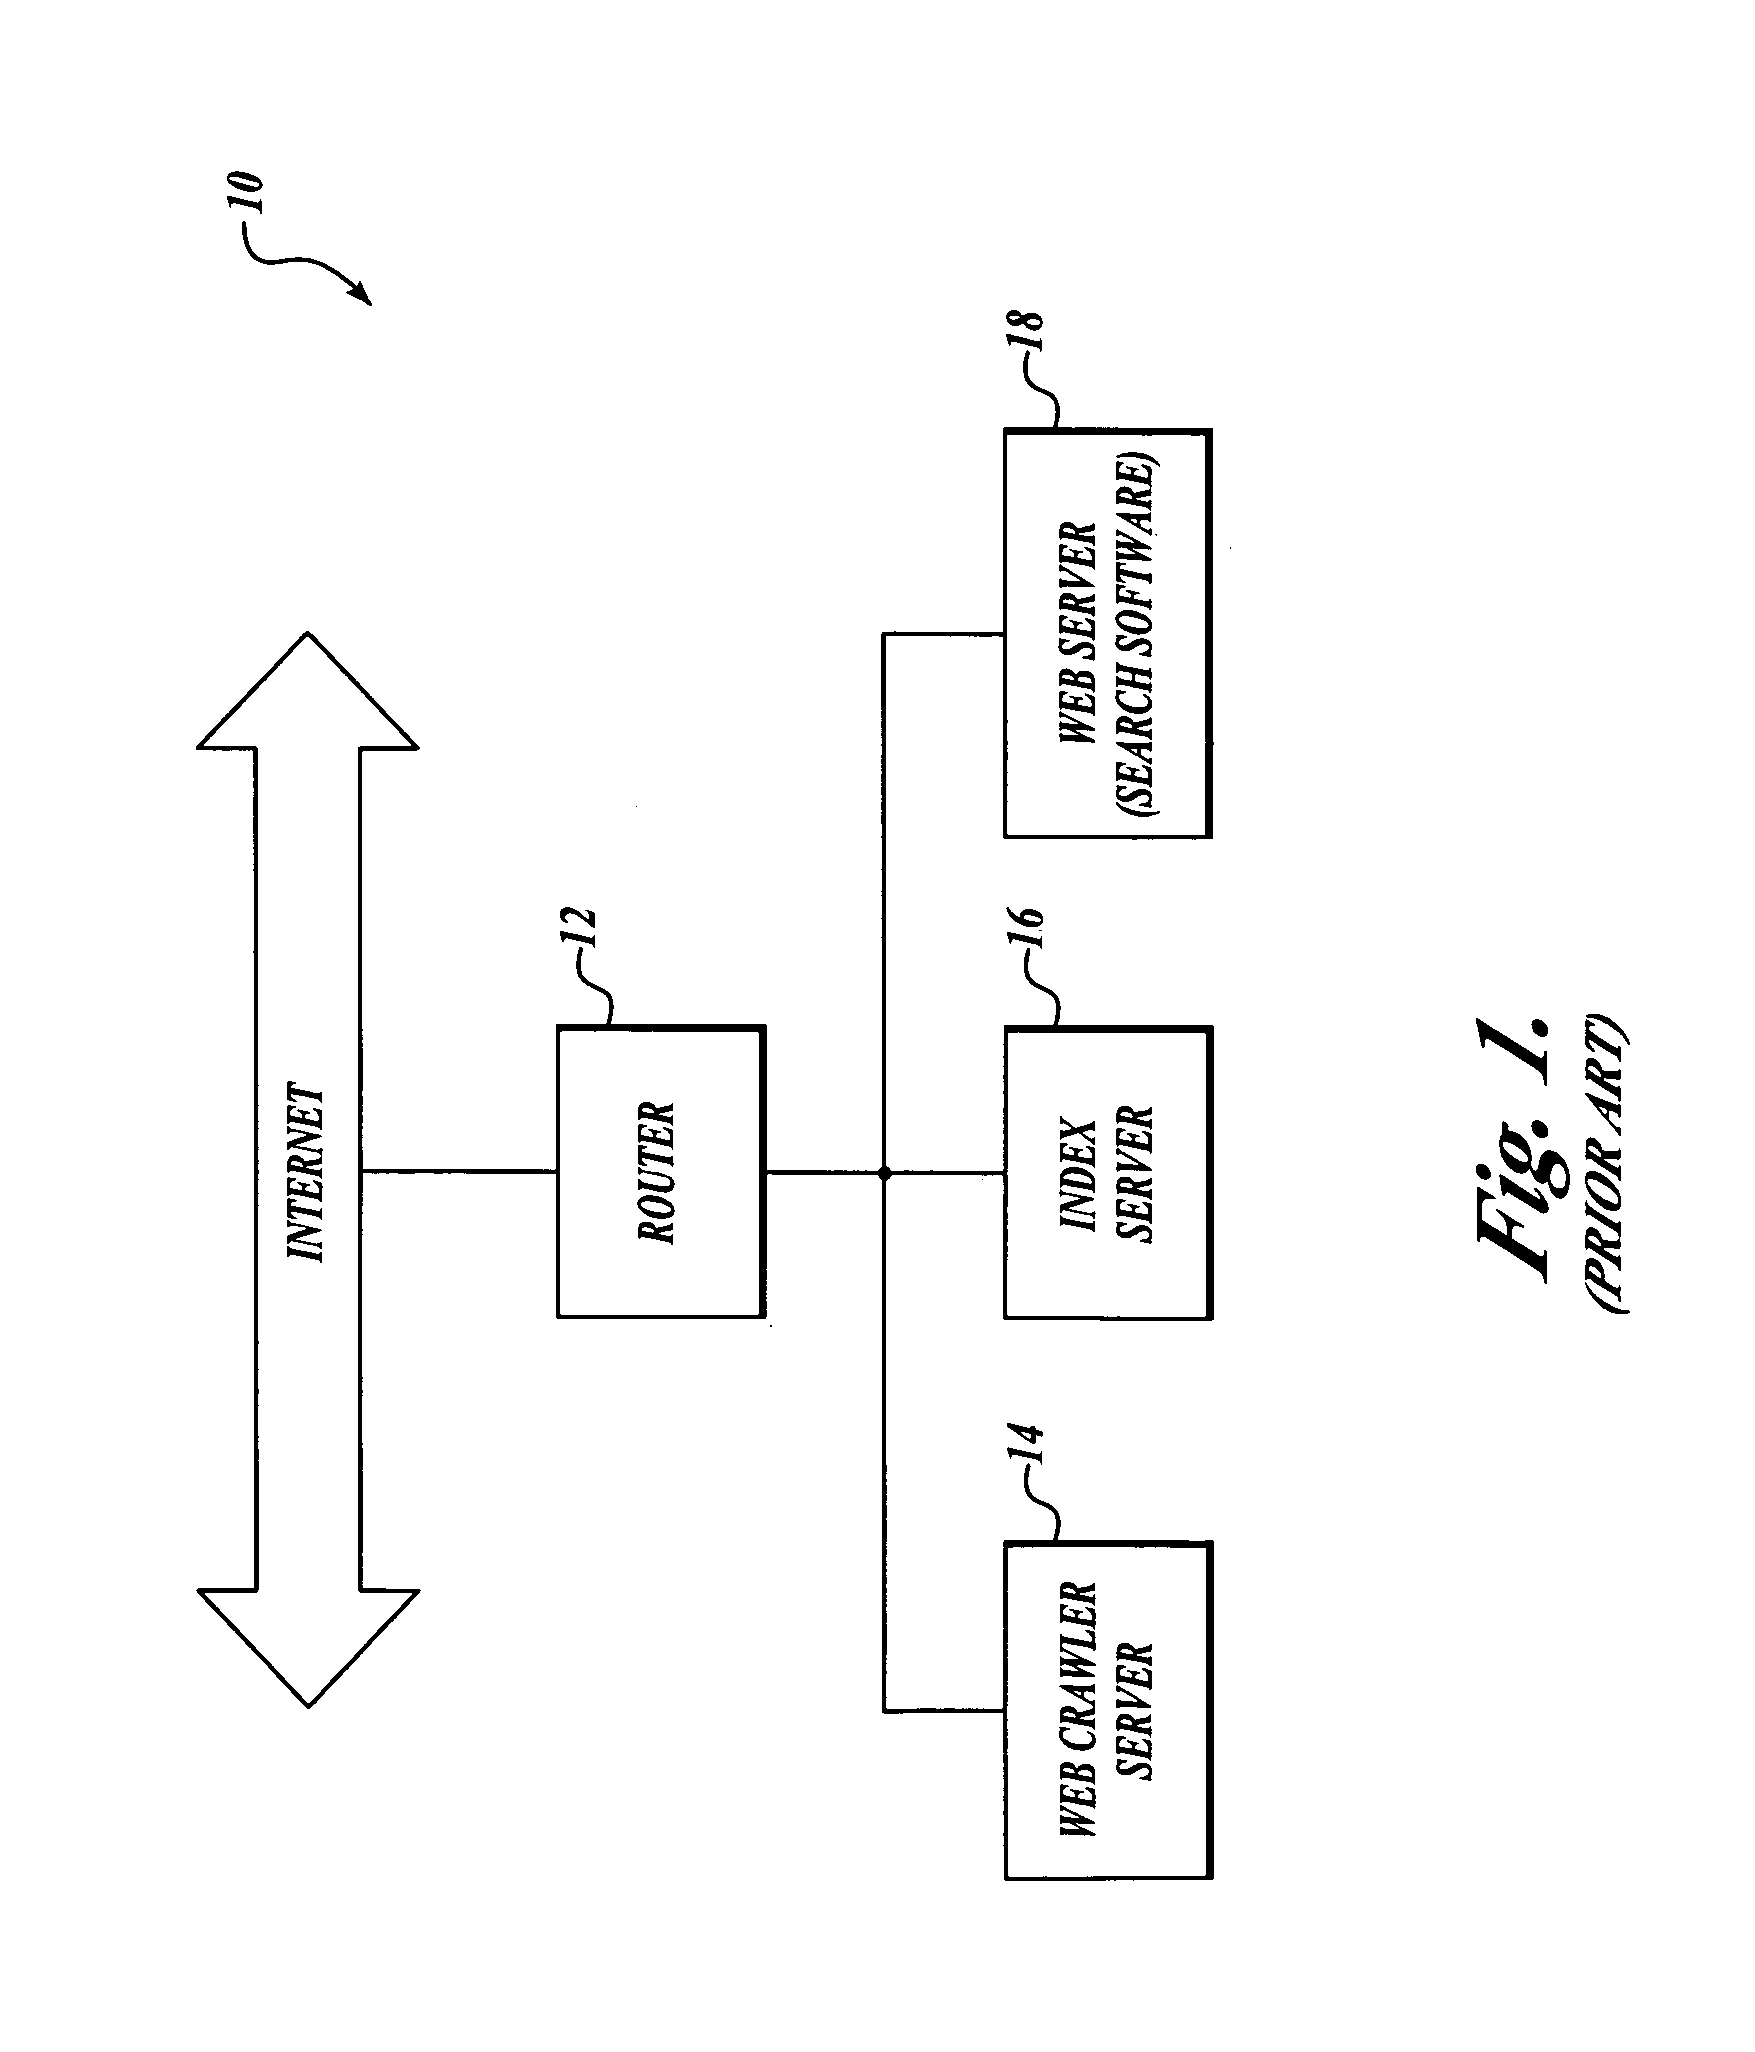 Method for using agents to create a computer index corresponding to the contents of networked computers